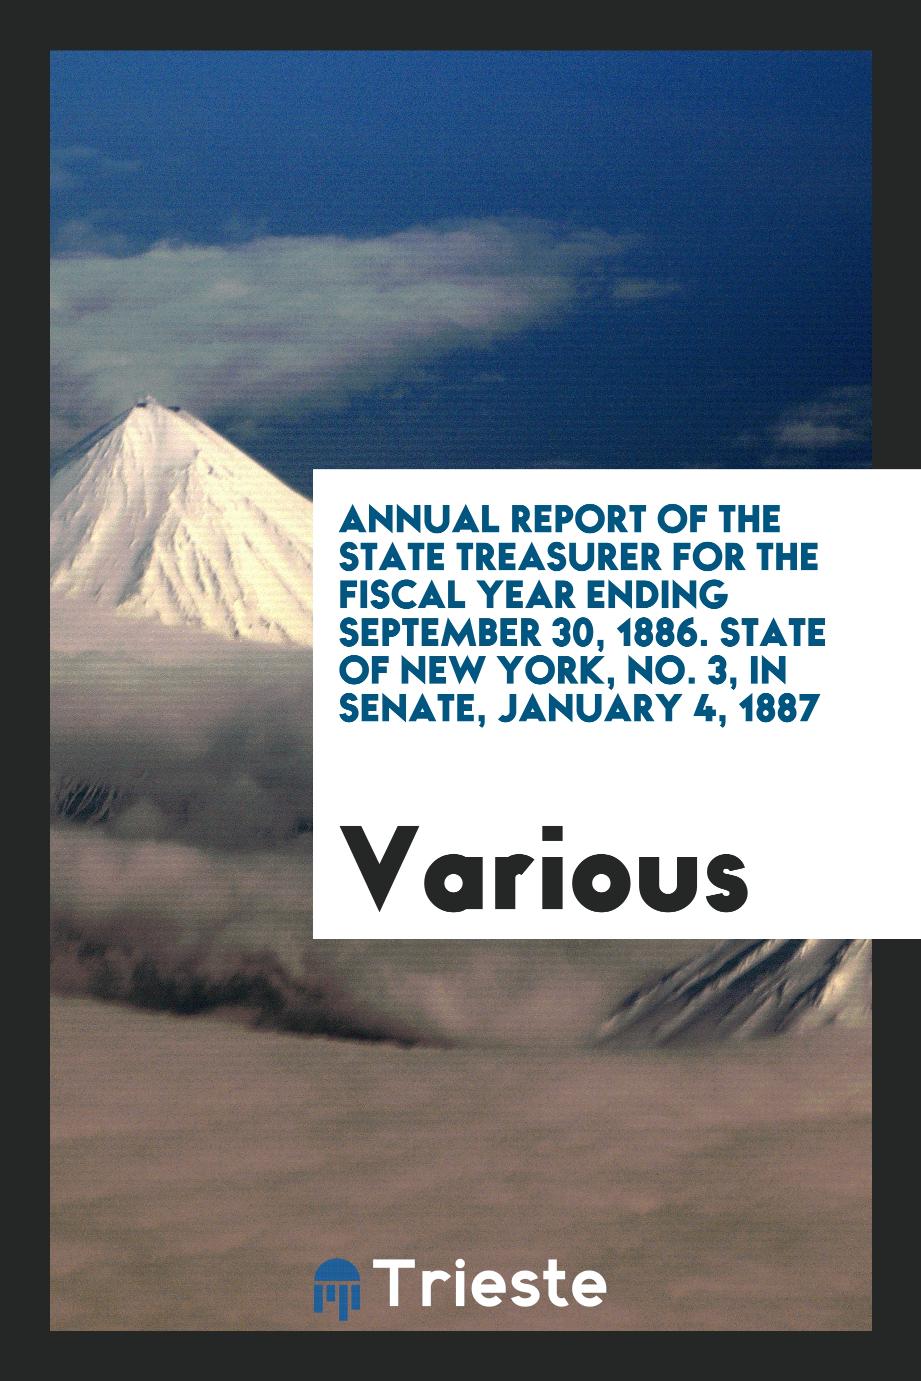 Annual Report of the State Treasurer for the Fiscal Year Ending September 30, 1886. State of New York, No. 3, in Senate, January 4, 1887